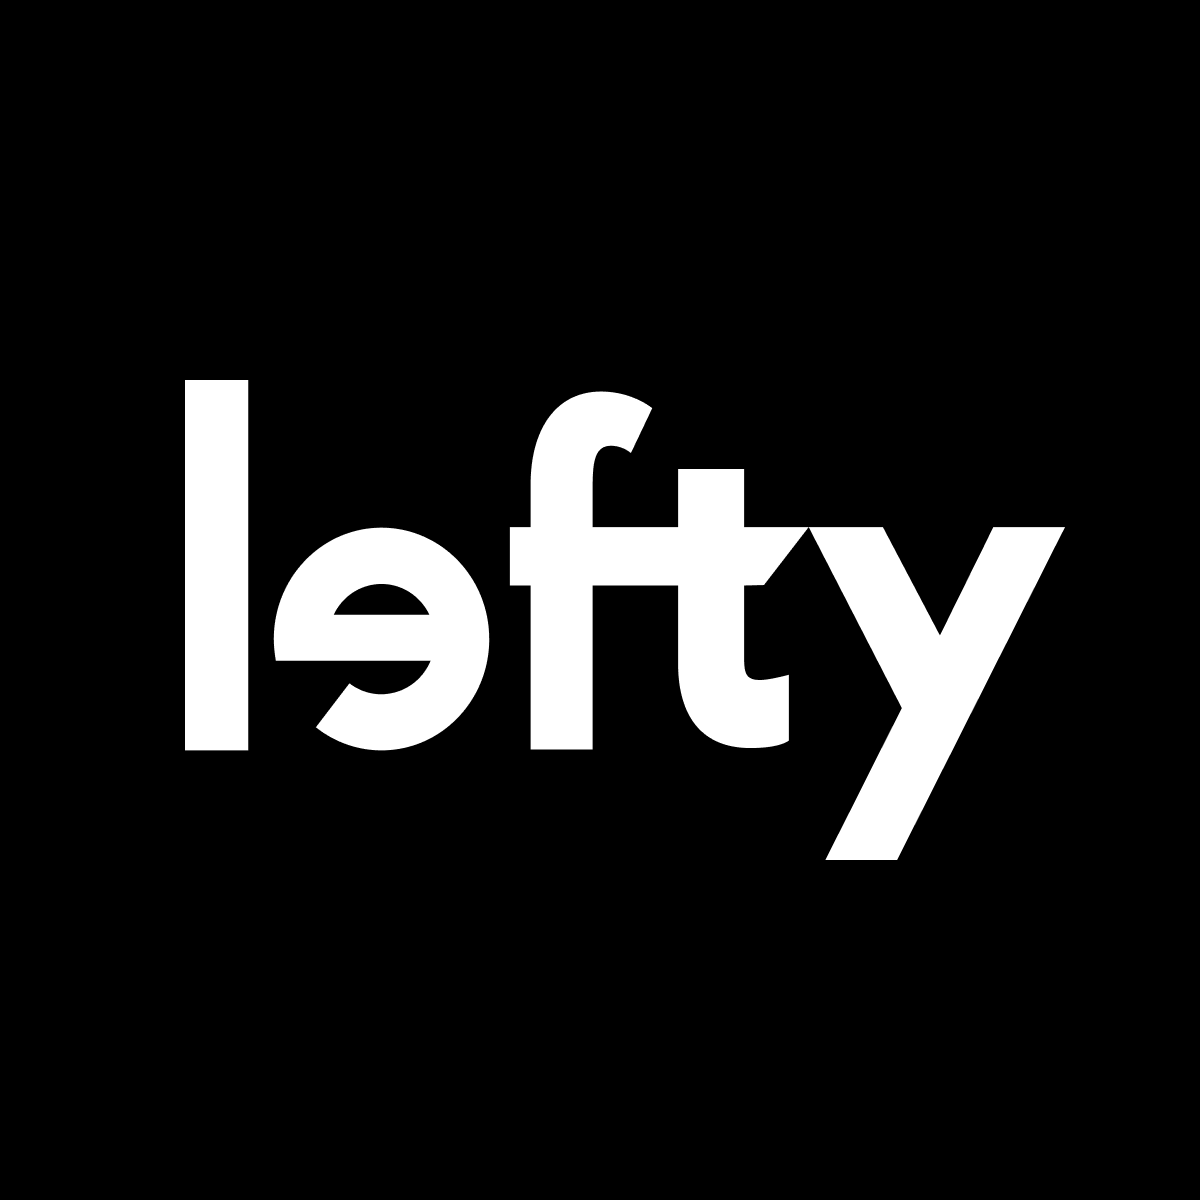 Hire Shopify Experts to integrate Lefty app into a Shopify store